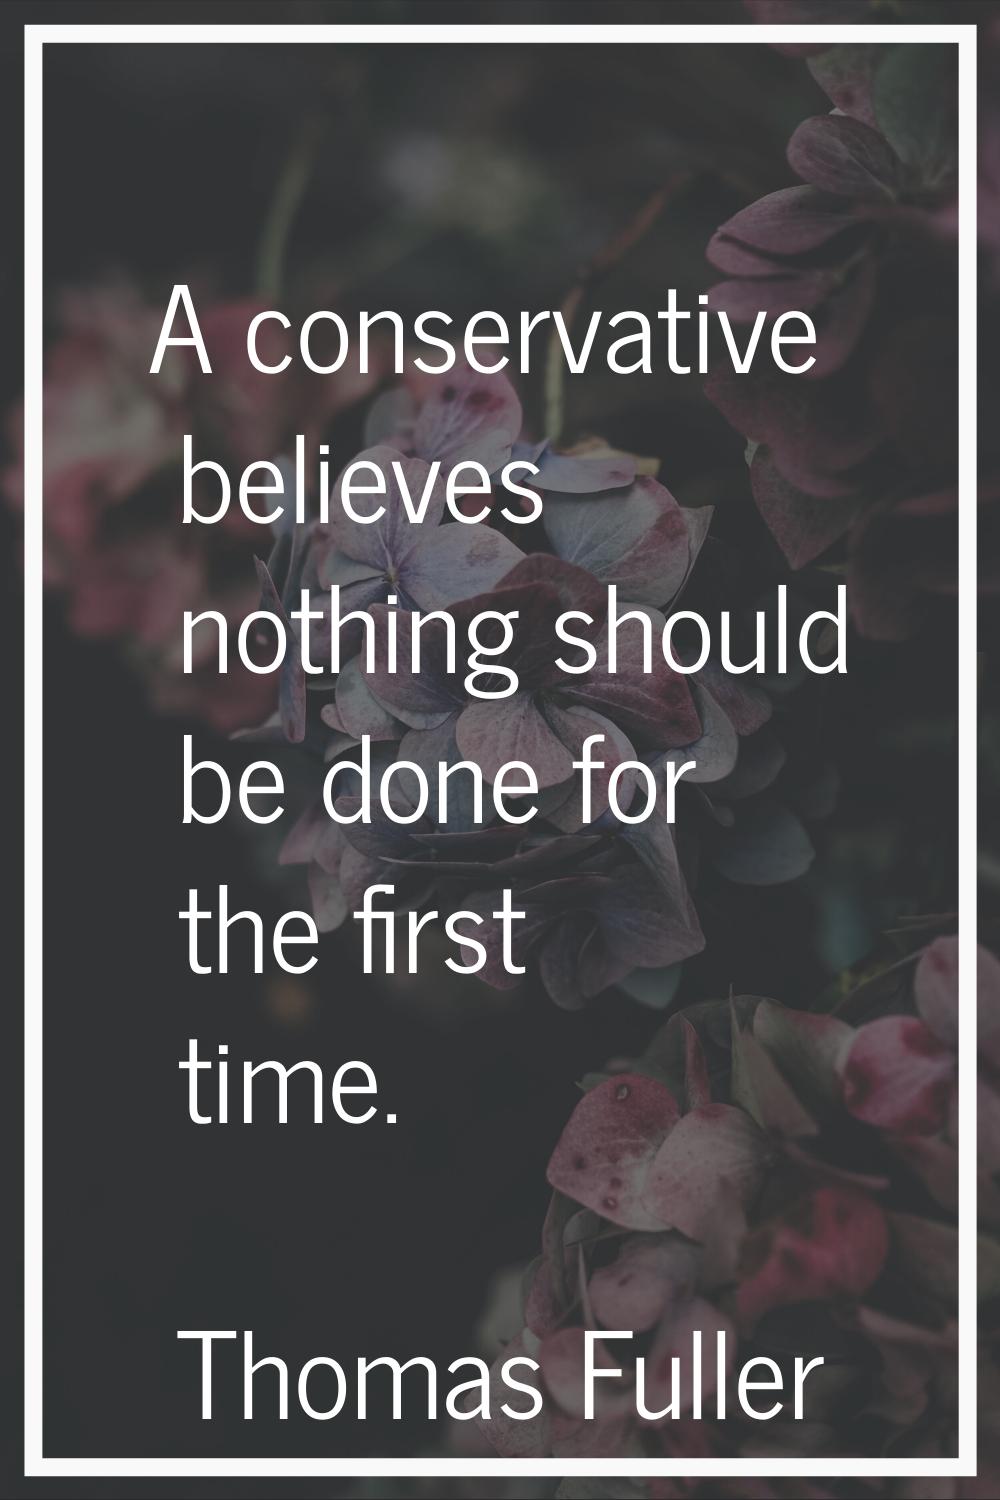 A conservative believes nothing should be done for the first time.